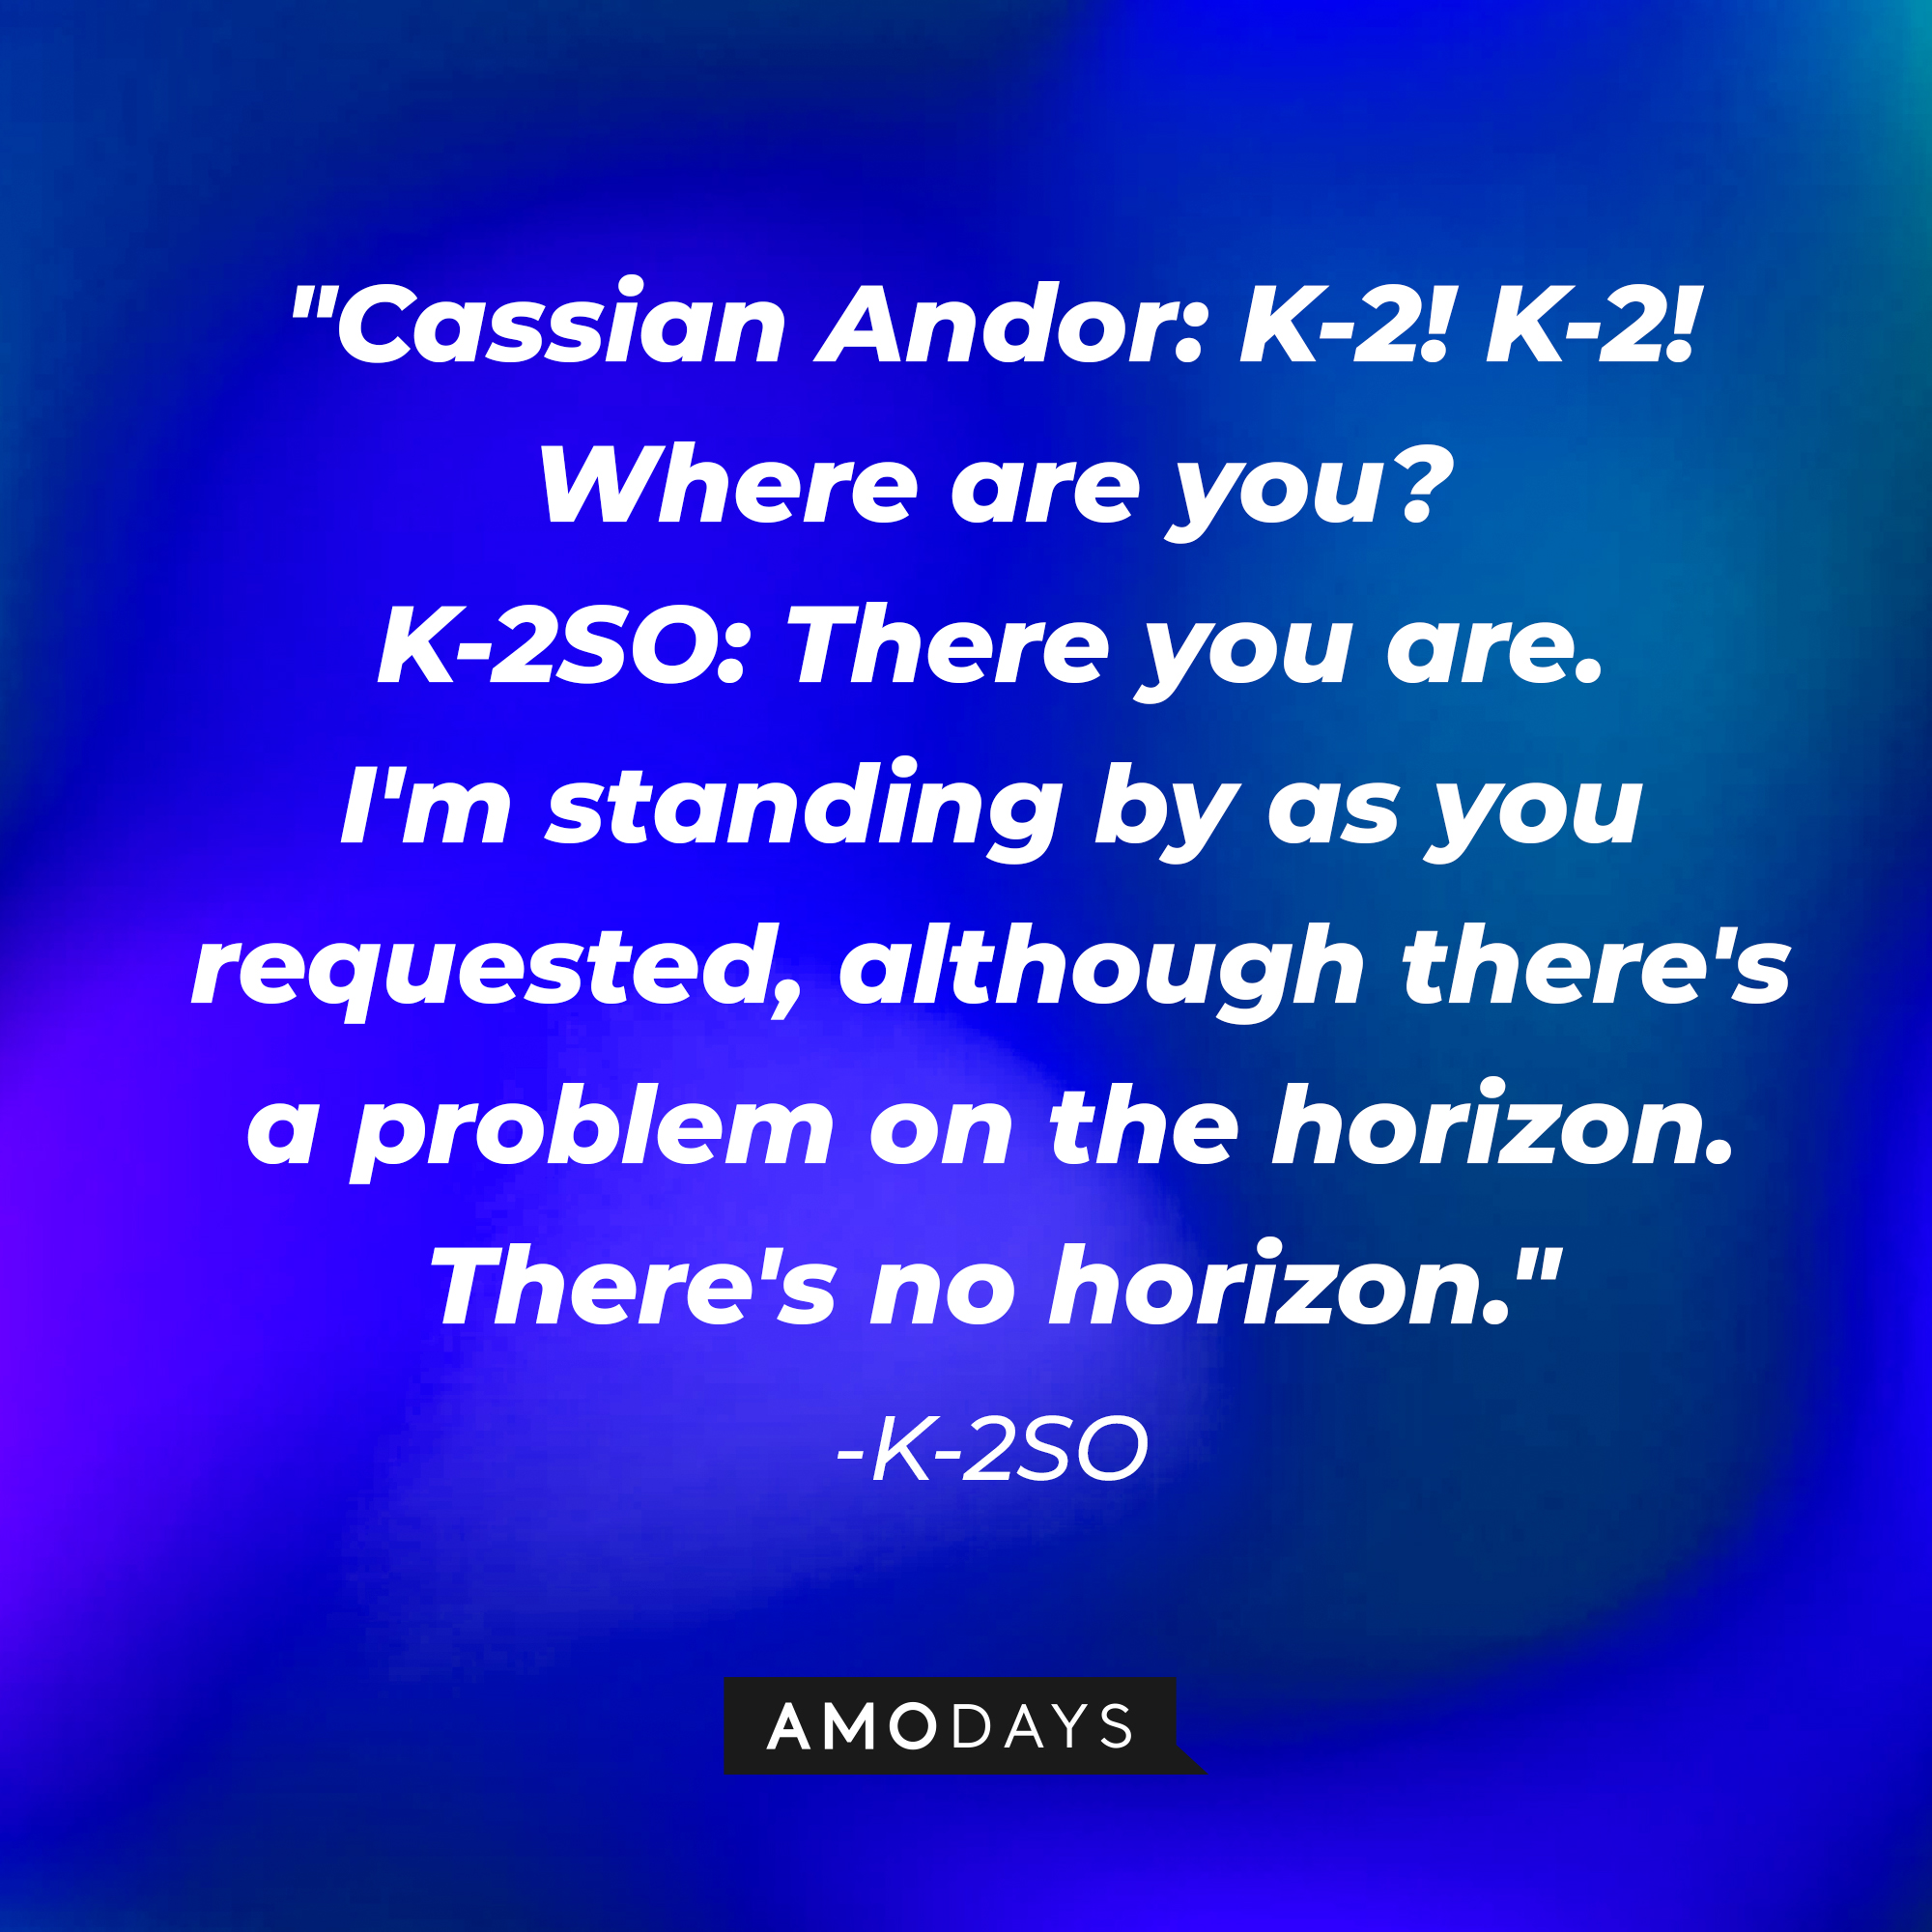 K-2SO's quote: "Cassian Andor: K-2! K-2! Where are you? K-2SO: There you are. I'm standing by as you requested, although there's a problem on the horizon. There's no horizon.” | Source: Amodays